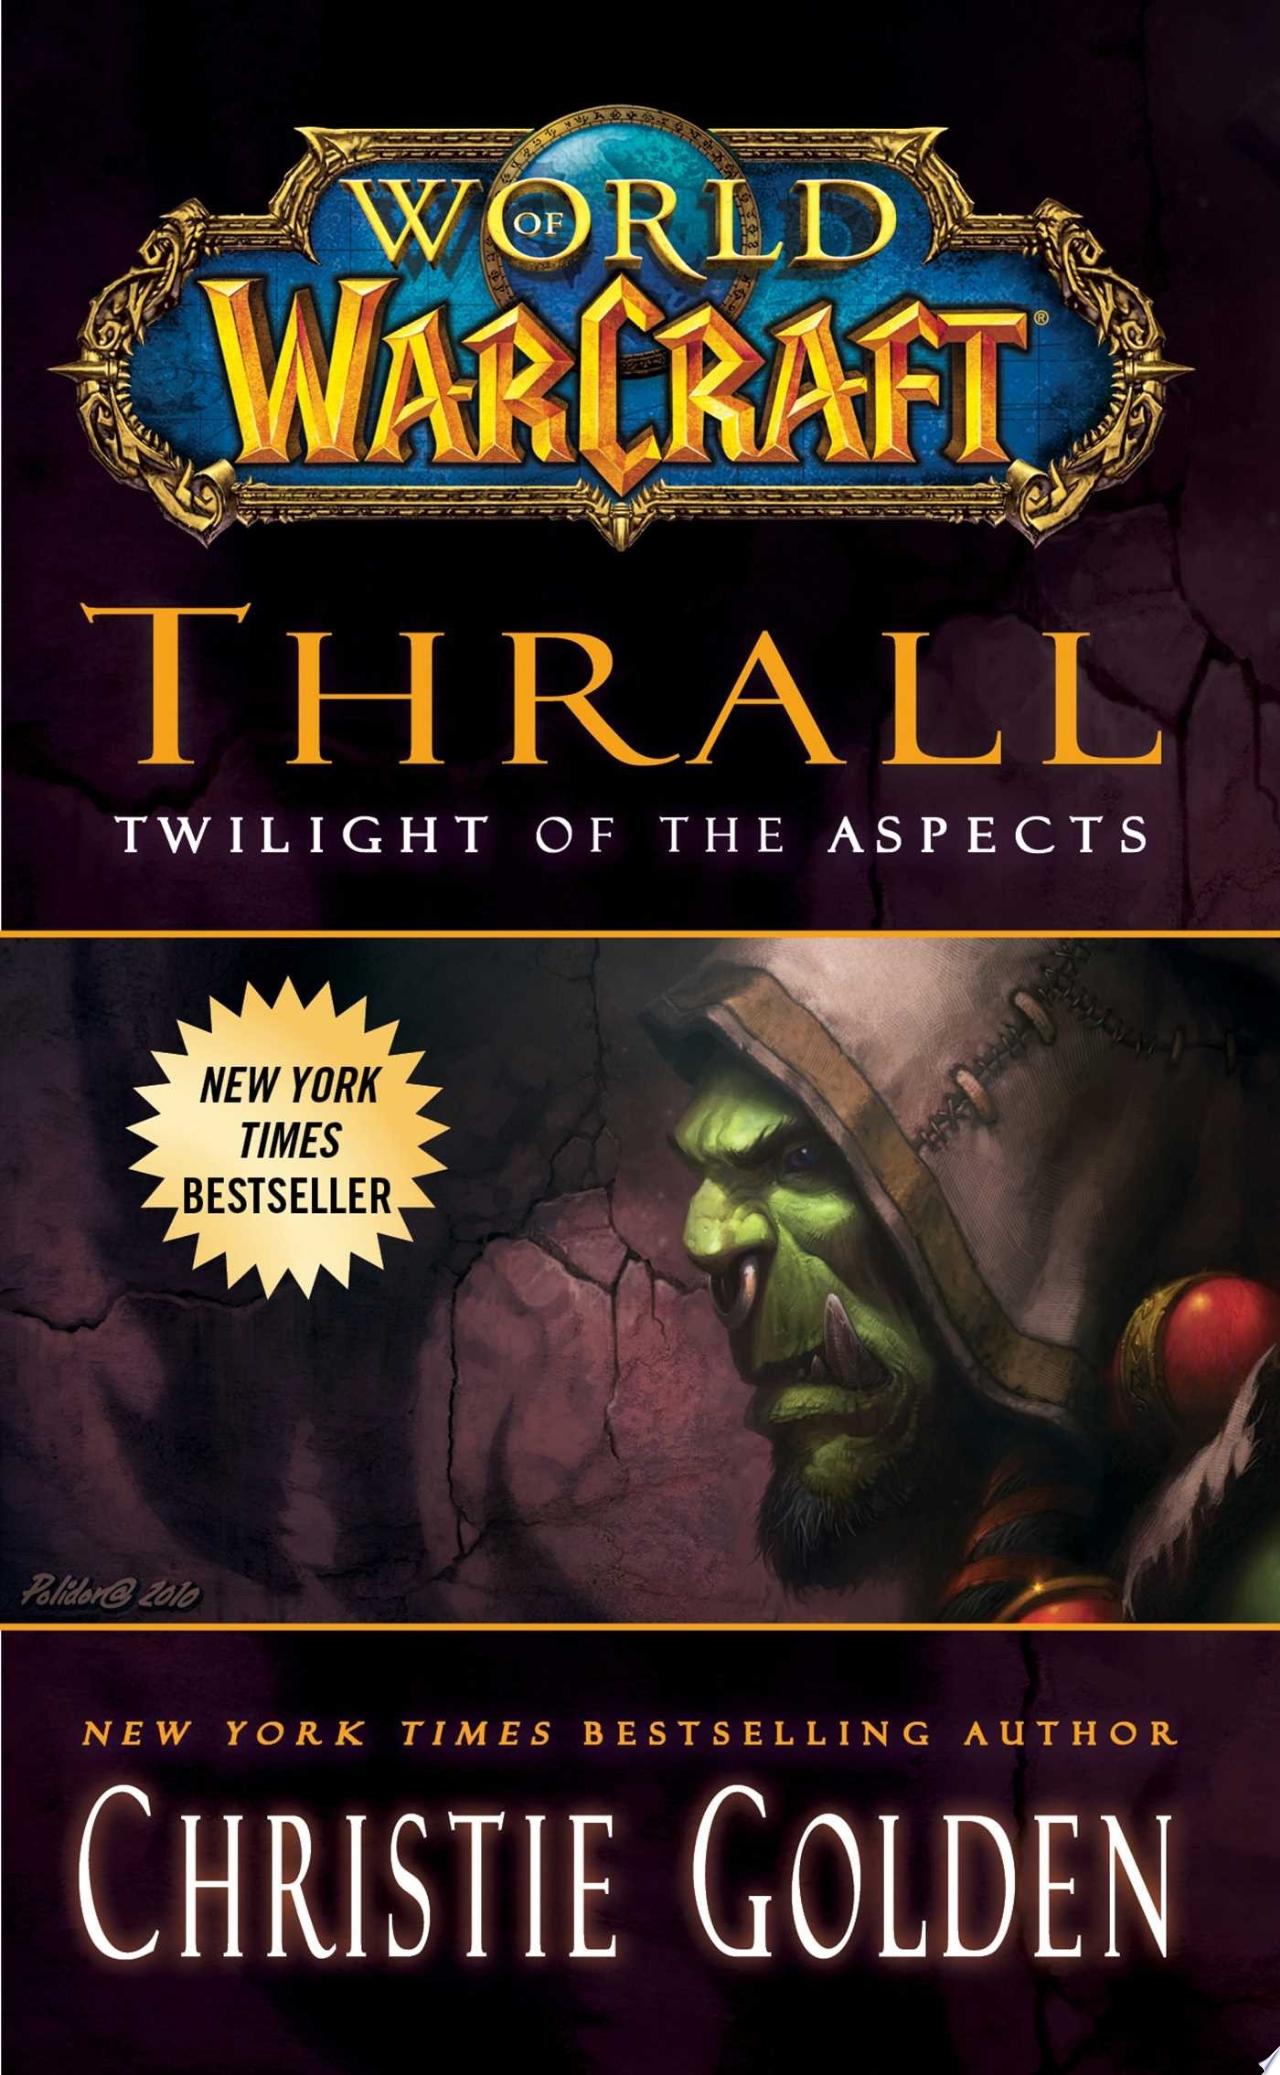 Book Cover for World of Warcraft: Thrall: Twilight of the Aspects